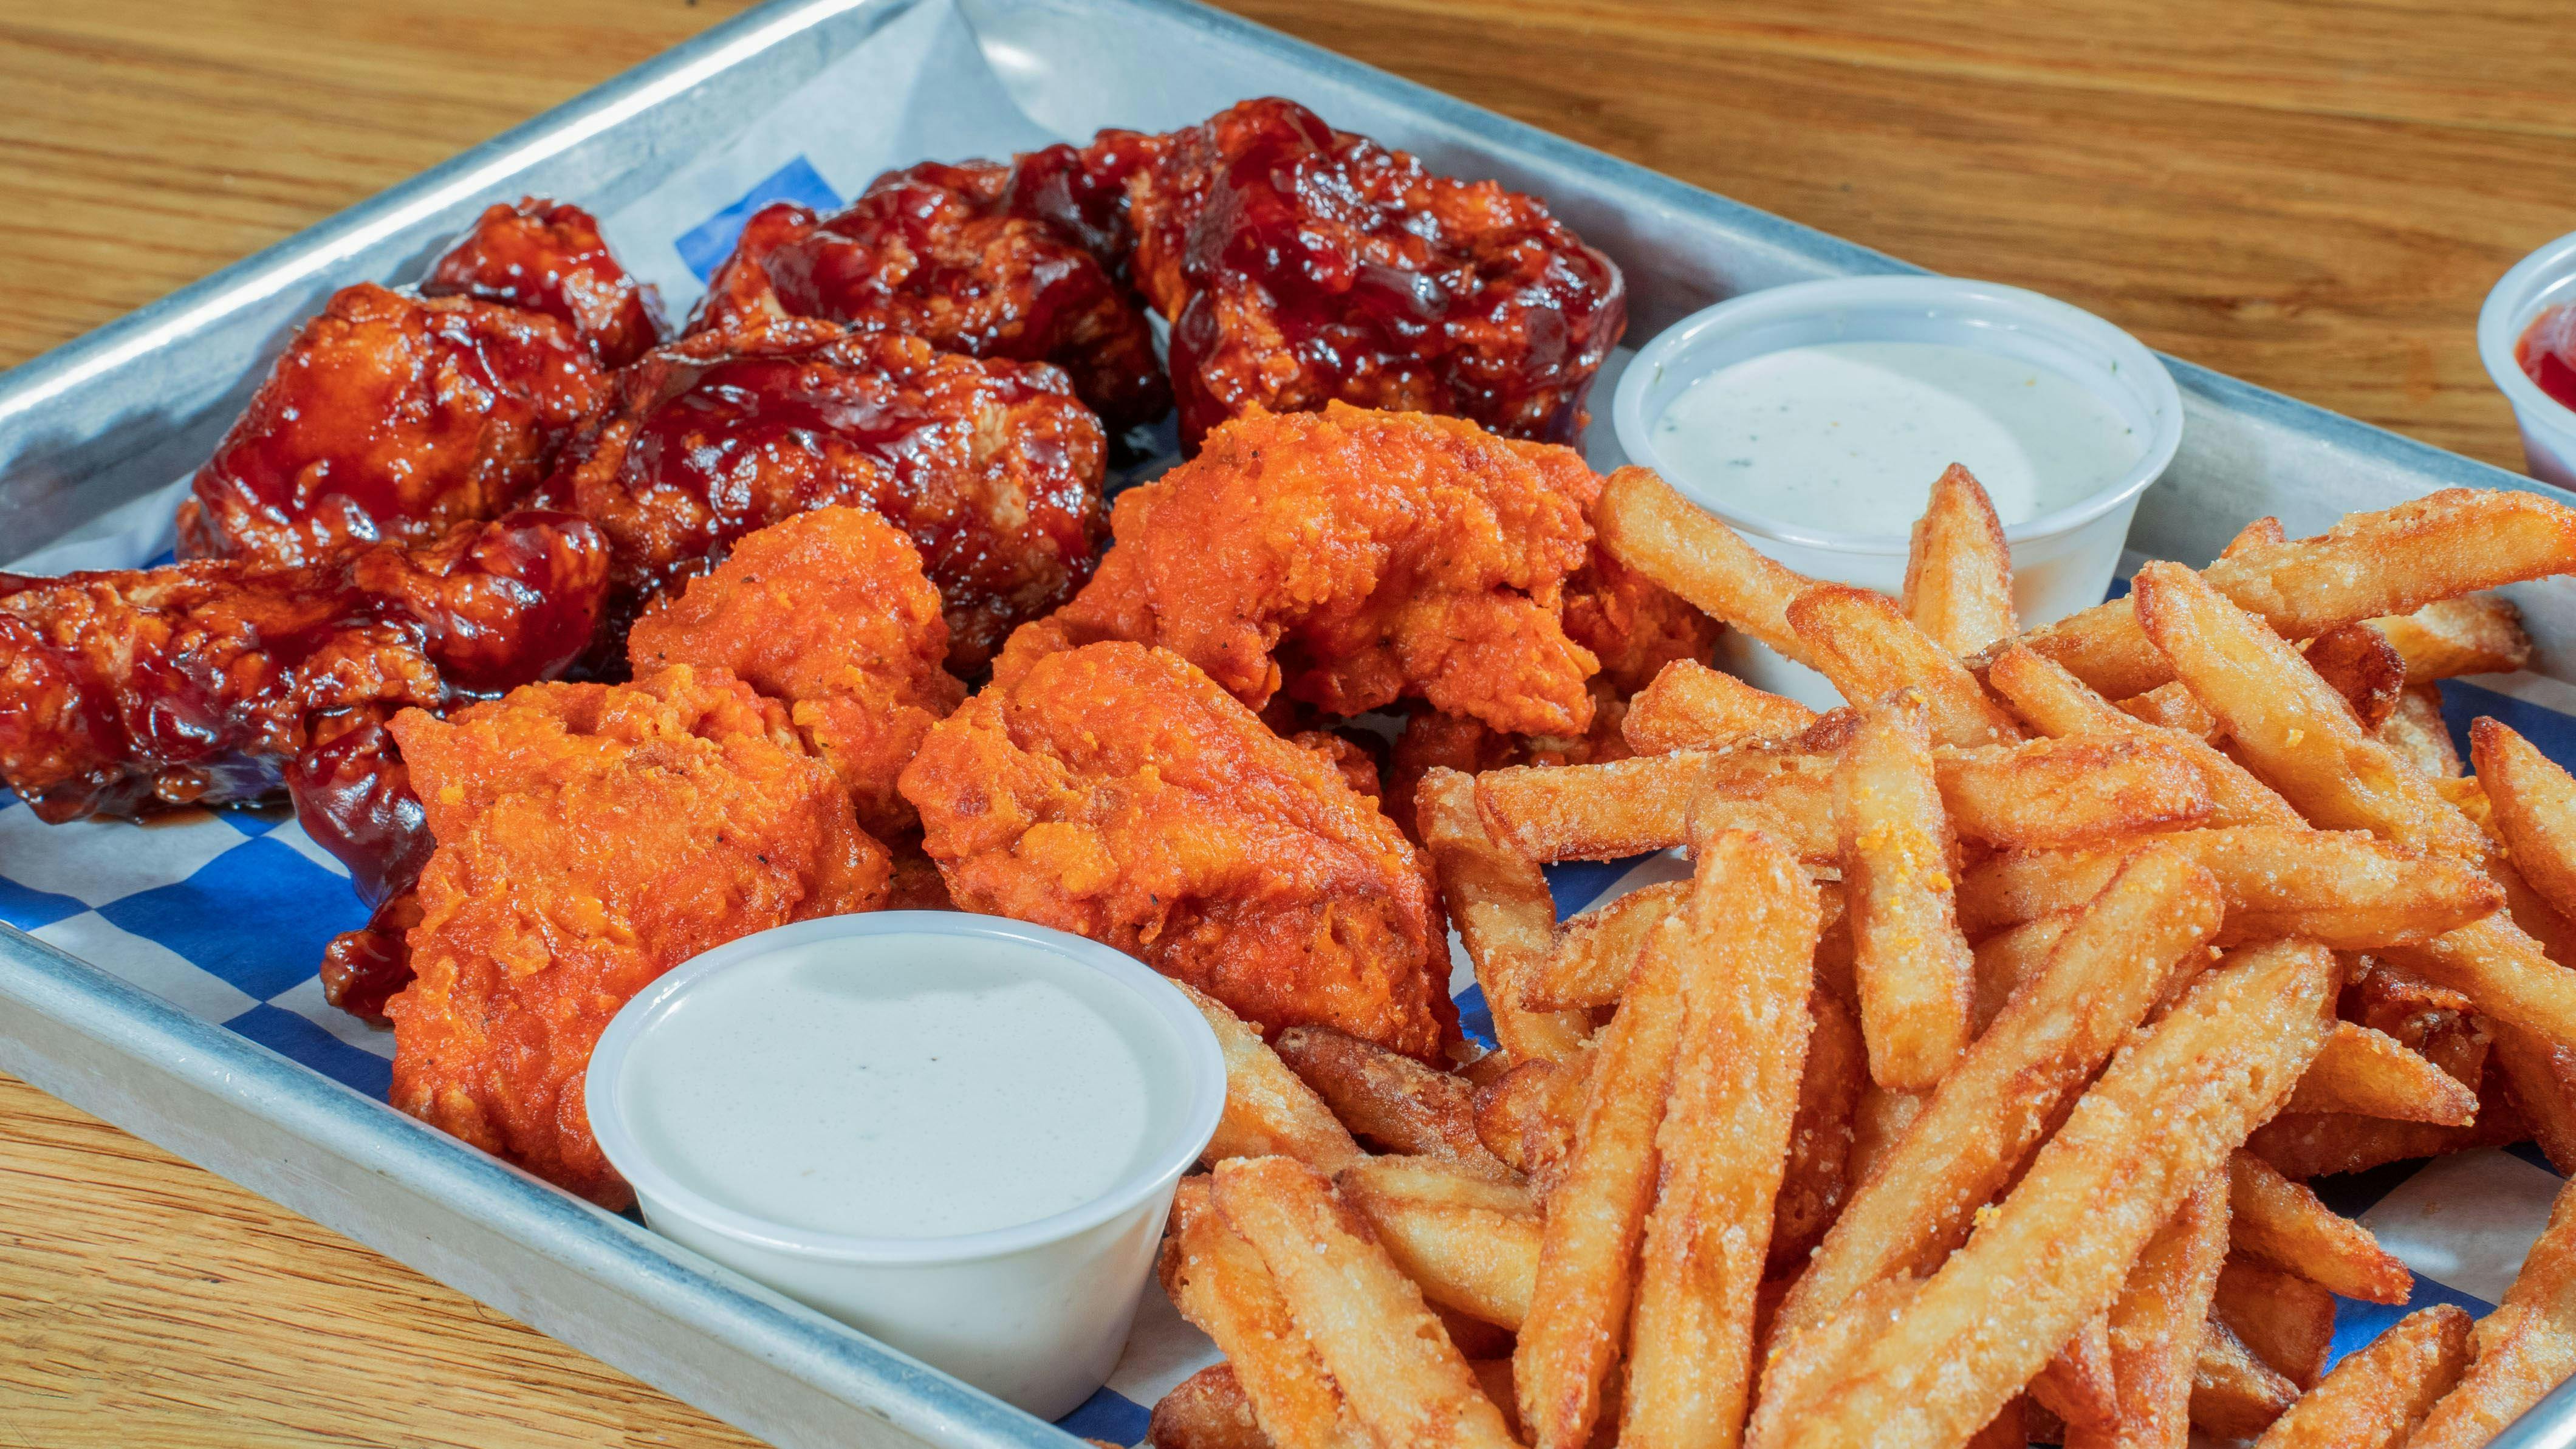 Ten Buffalo Boneless Wings with Fries from Austin Chicken Nugget  - Research Blvd in Austin, TX